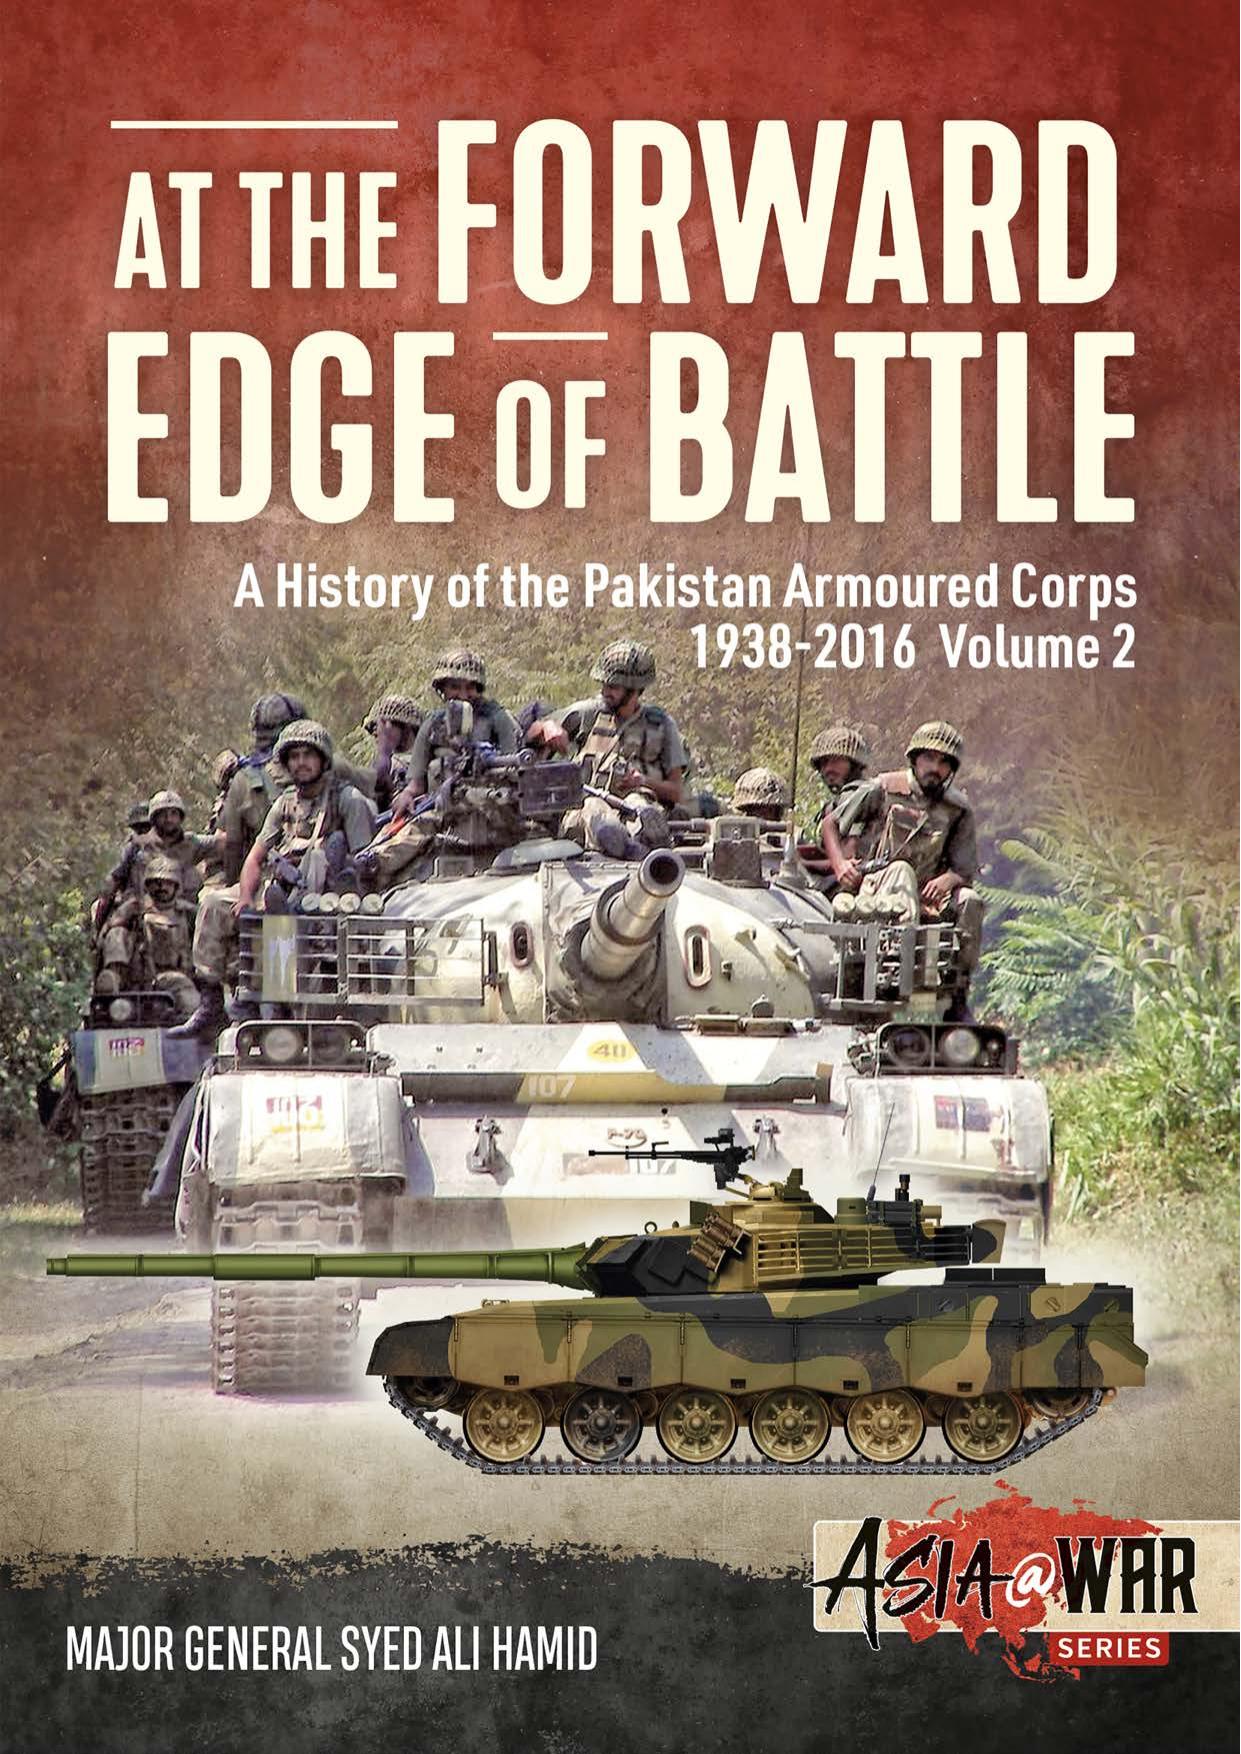 At the Forward Edge of Battle: A History of the Pakistan Armoured Corps 1938-2016 (2) by Syed Ali Hamid